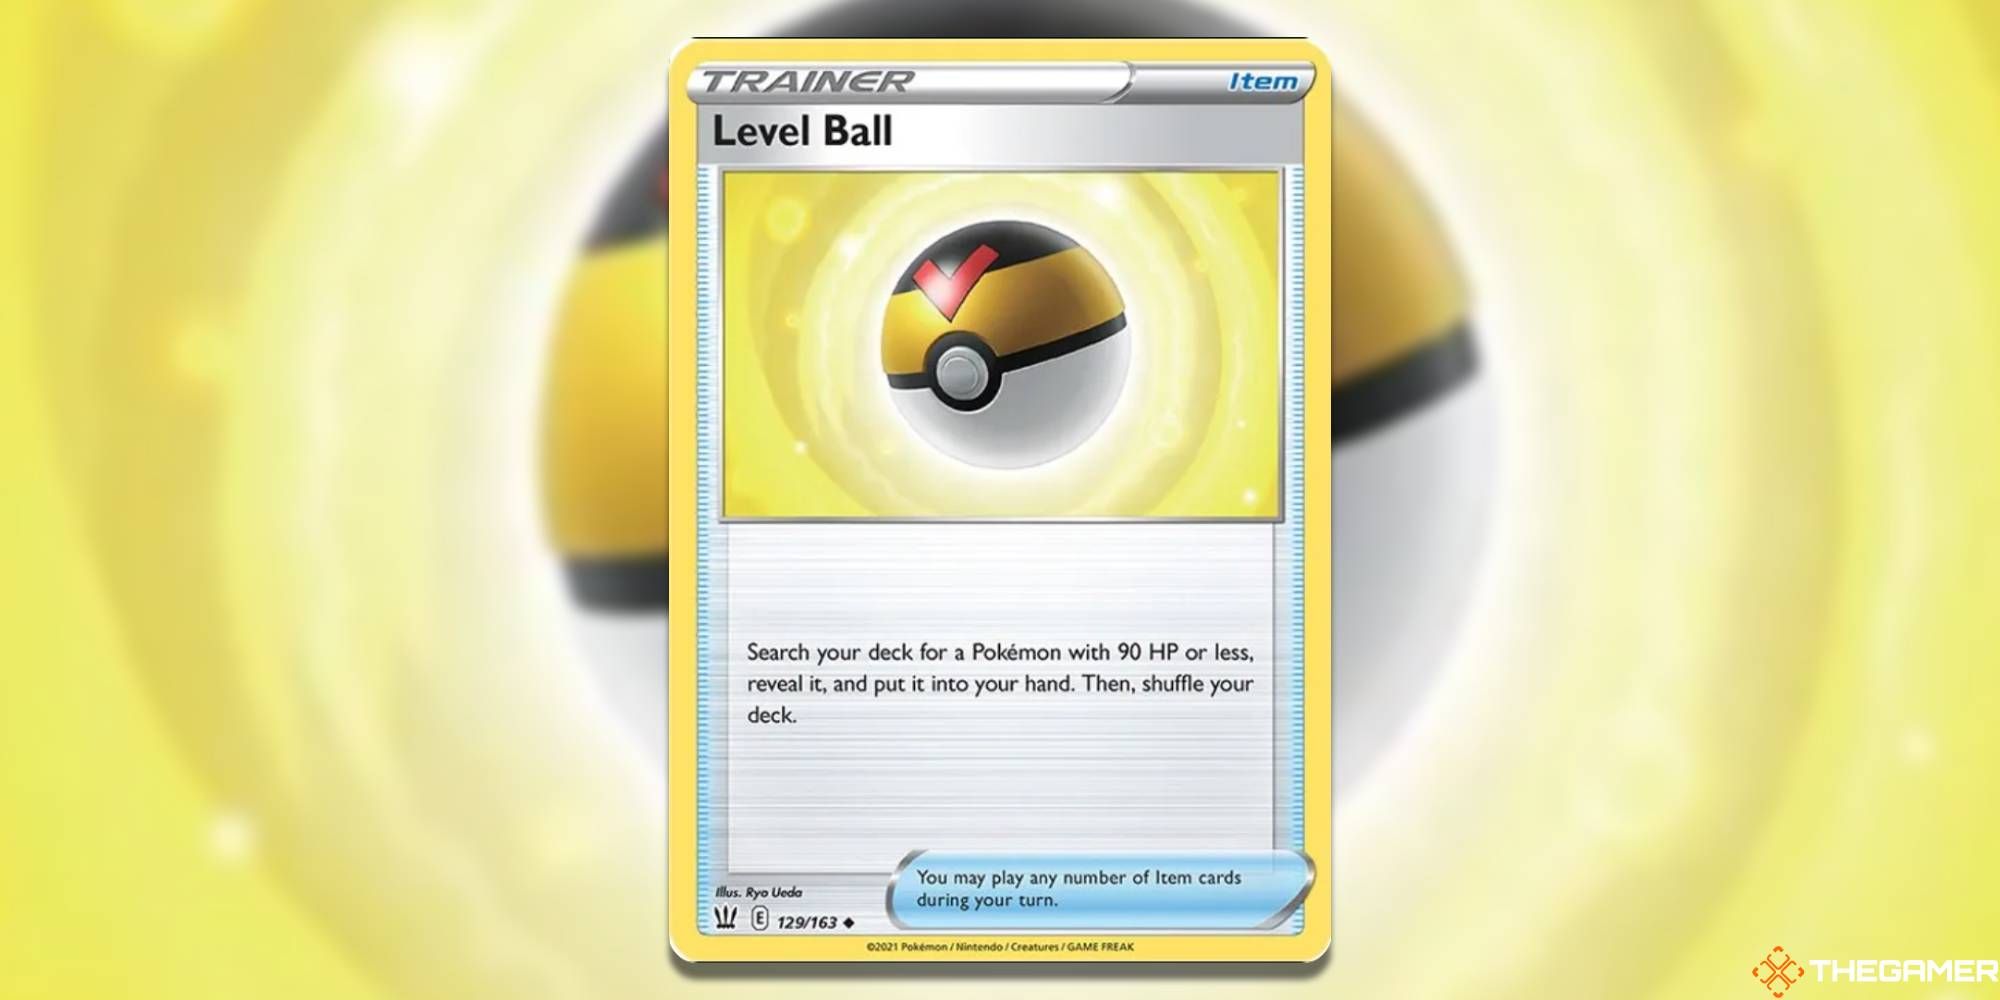 Level Ball from the Pokemon TCG, with blurred background